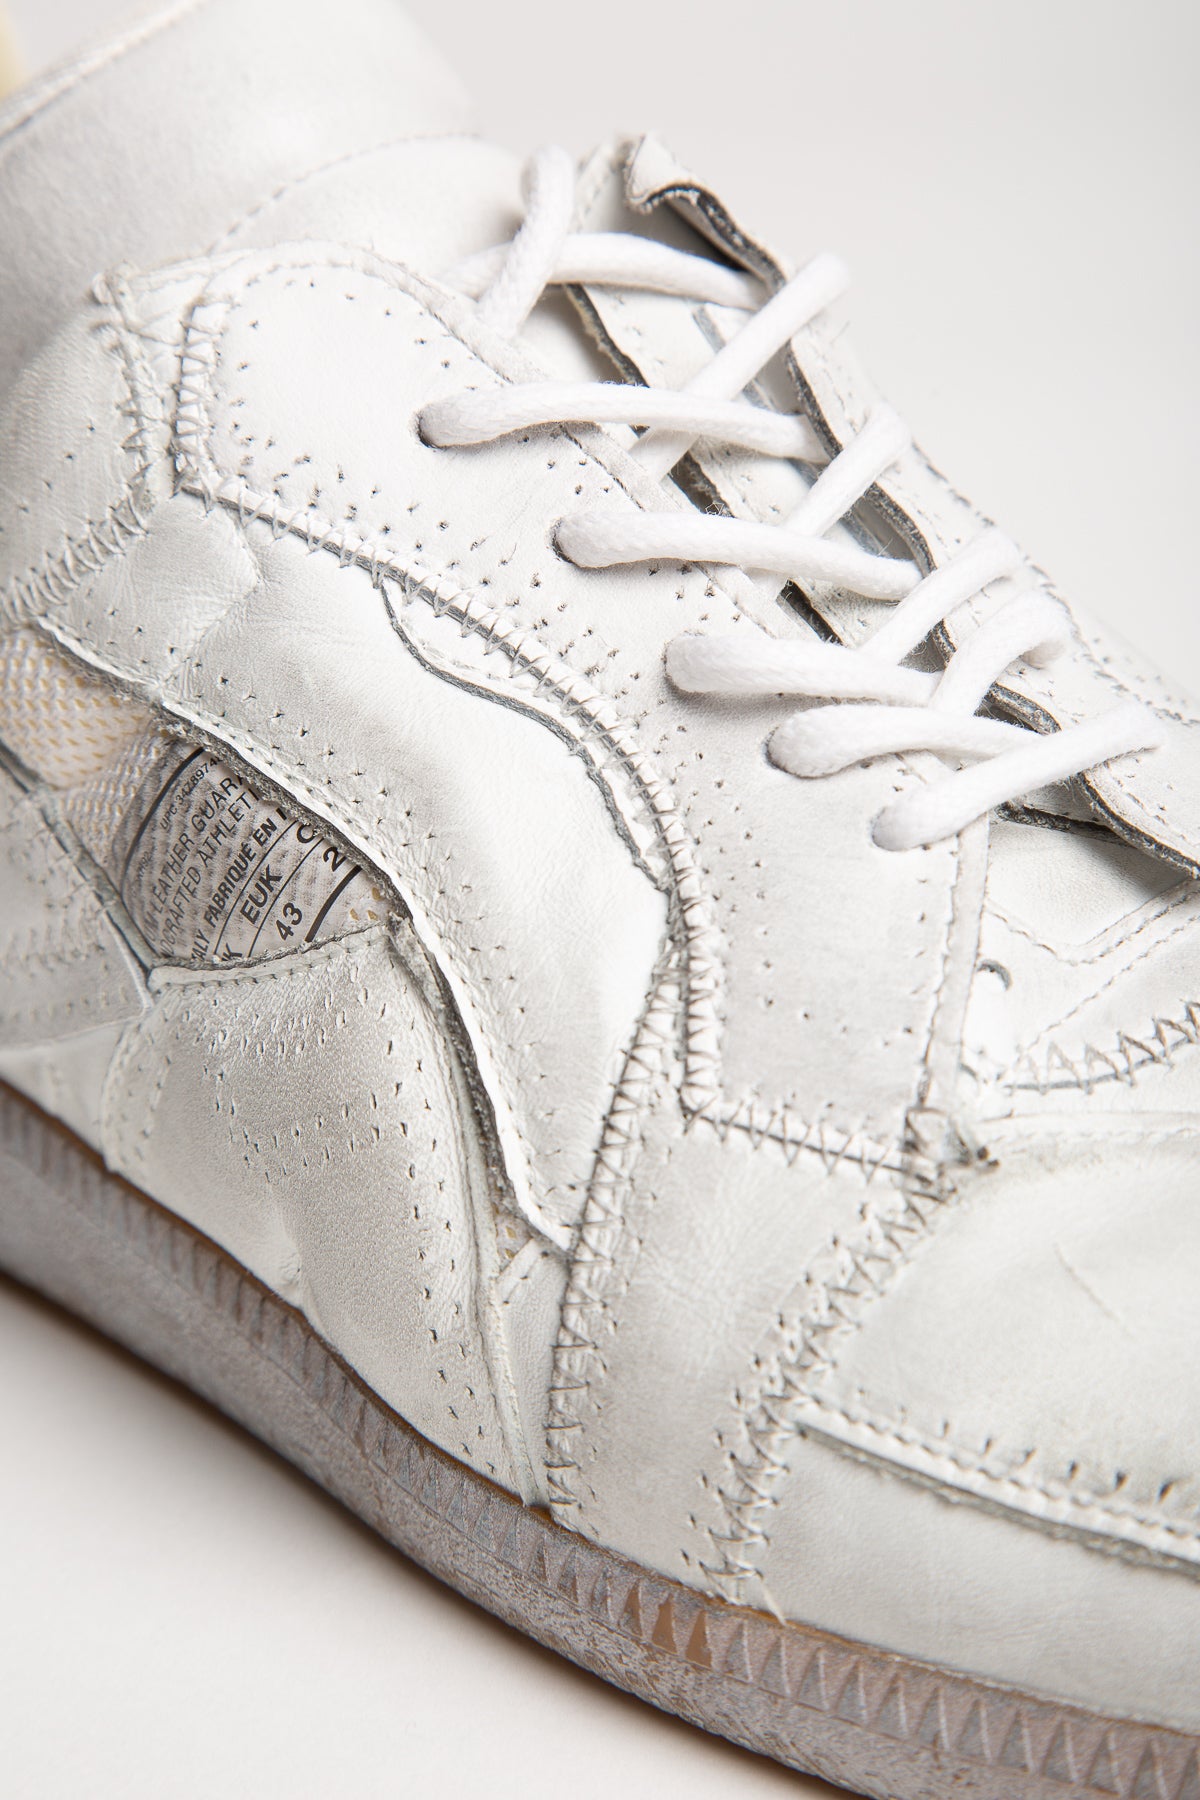 MAISON MARGIELA | LIMITED EDITION SNEAKERS